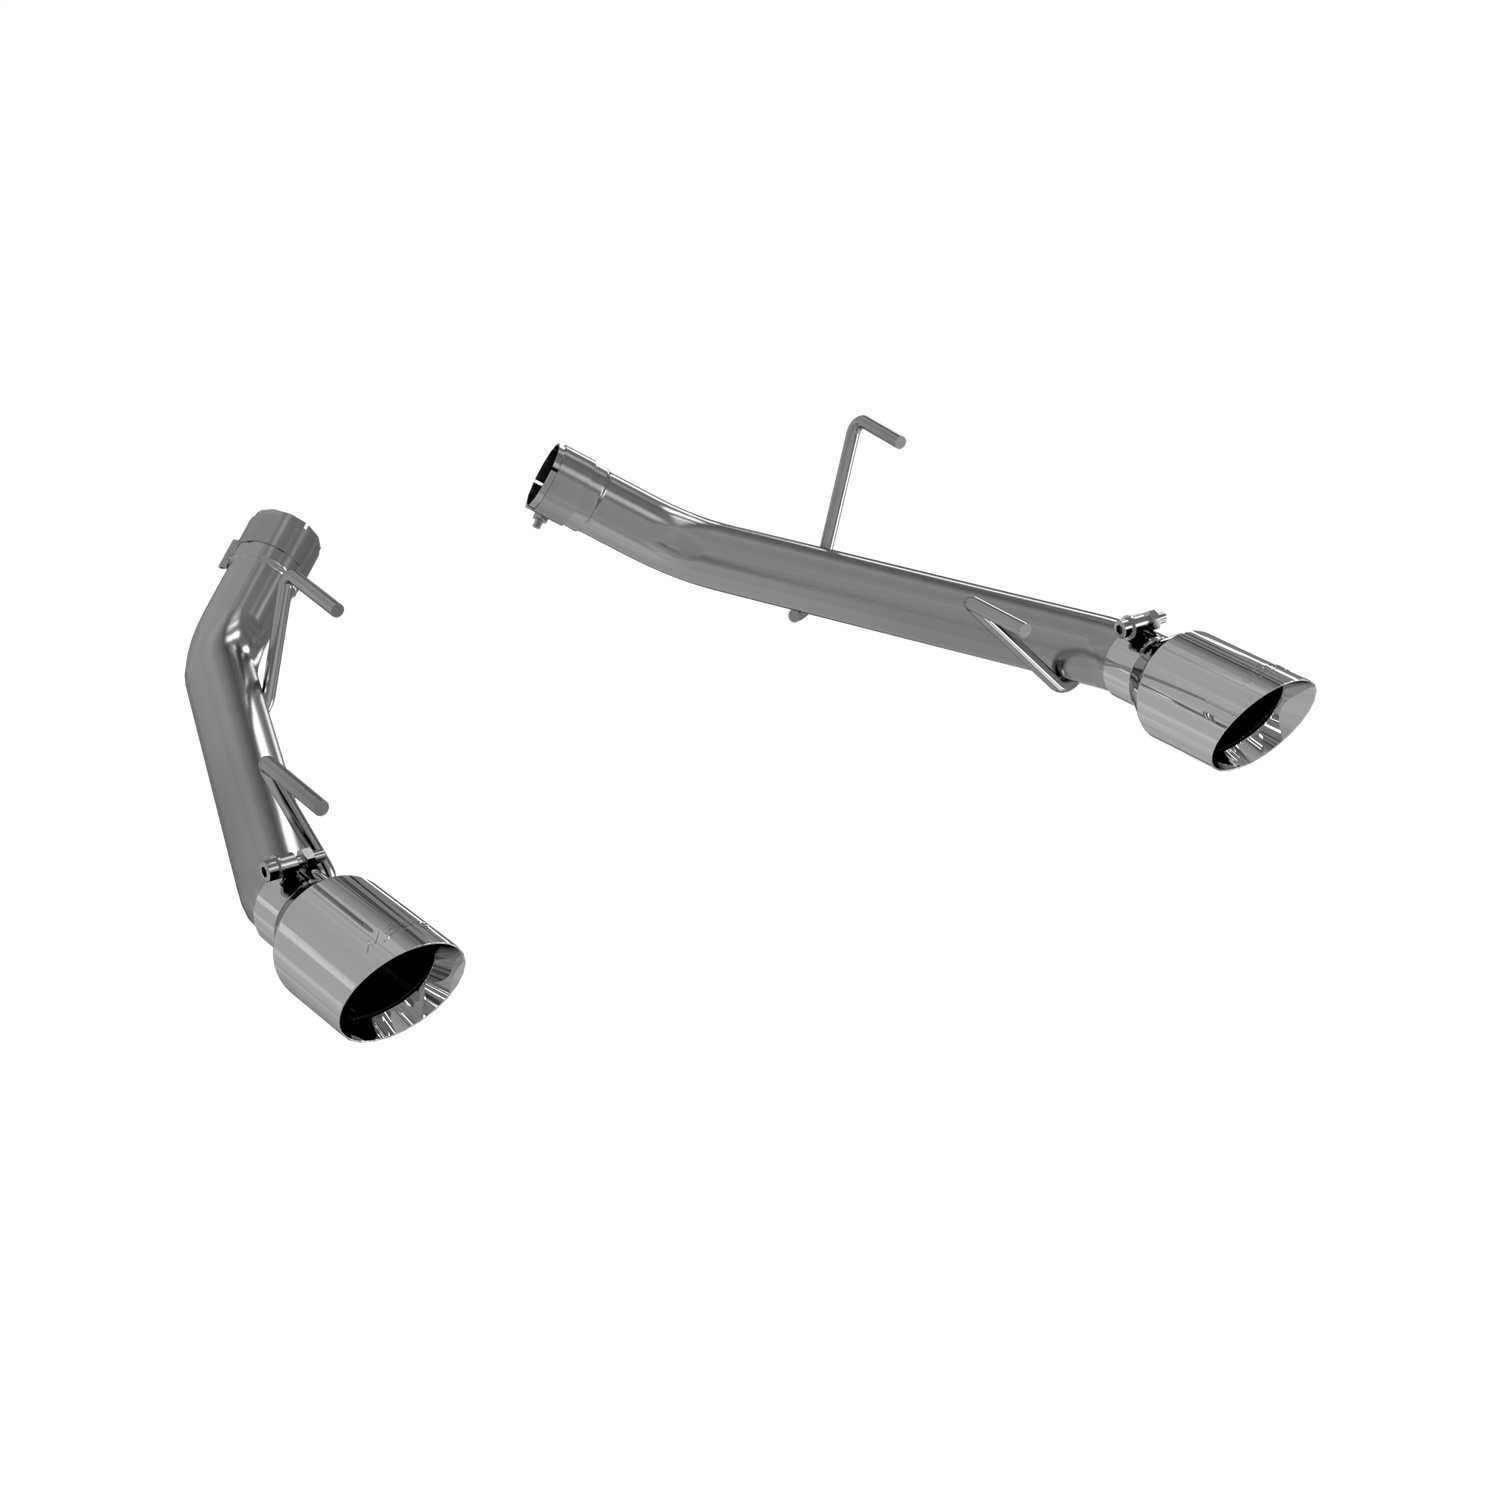 MBRP Exhaust S7202304 Armor Pro Axle Back Exhaust System Fits 05-10 Mustang